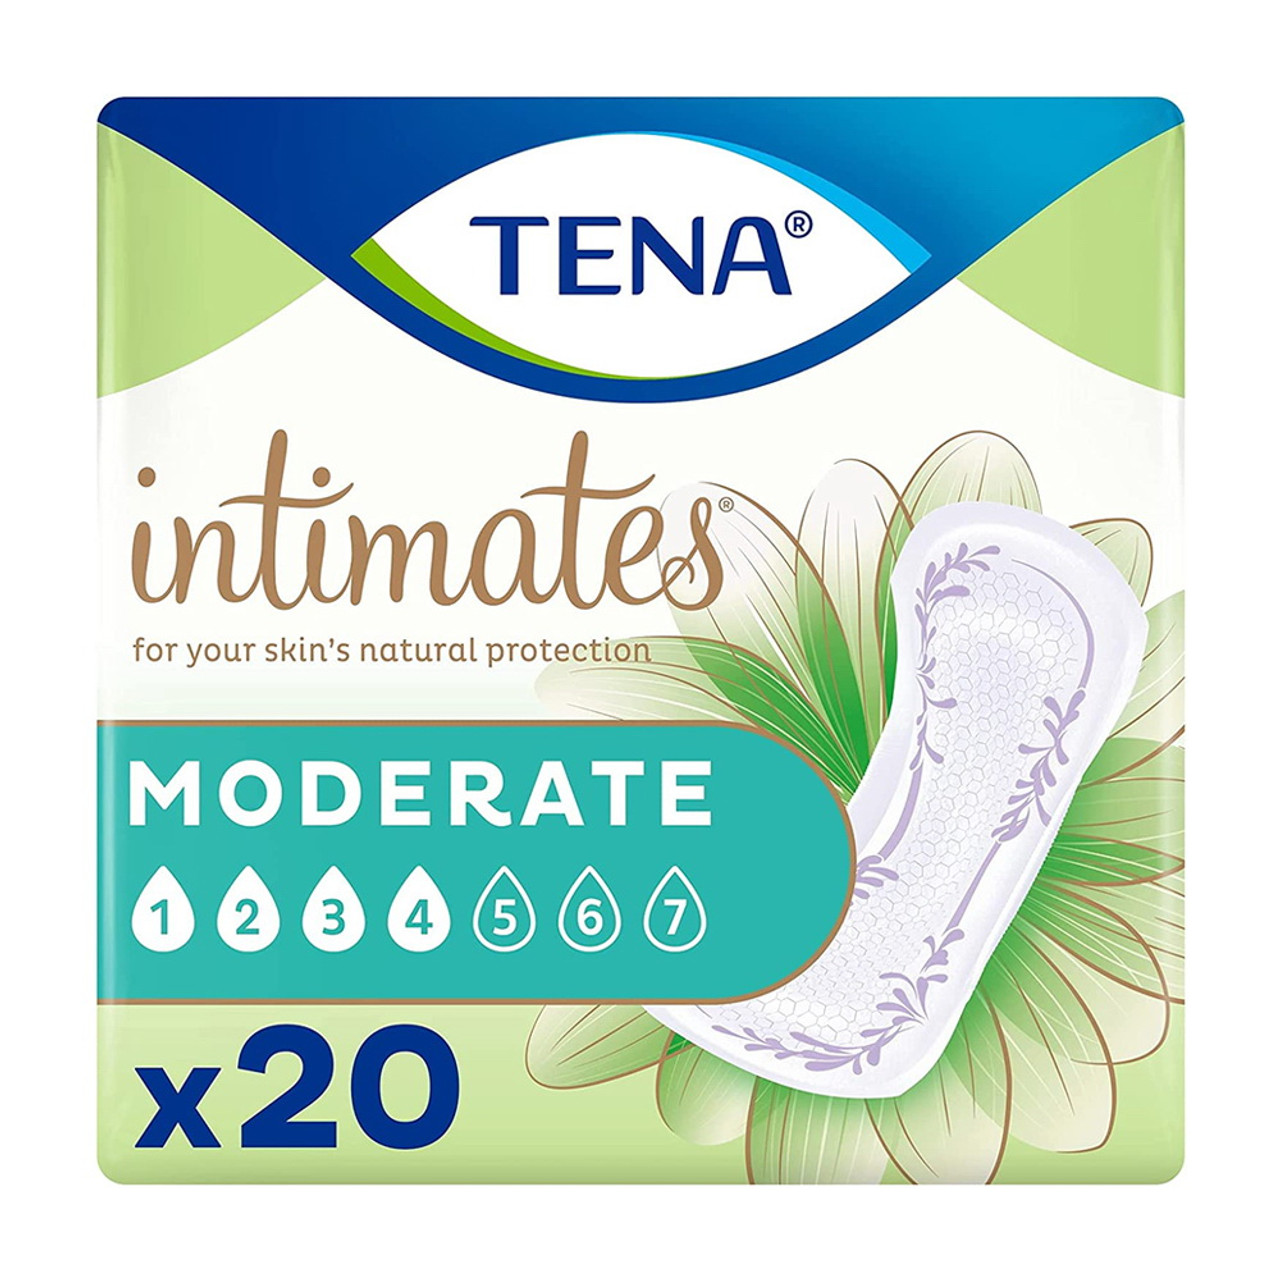 TENA Overnight Incontinence Pads